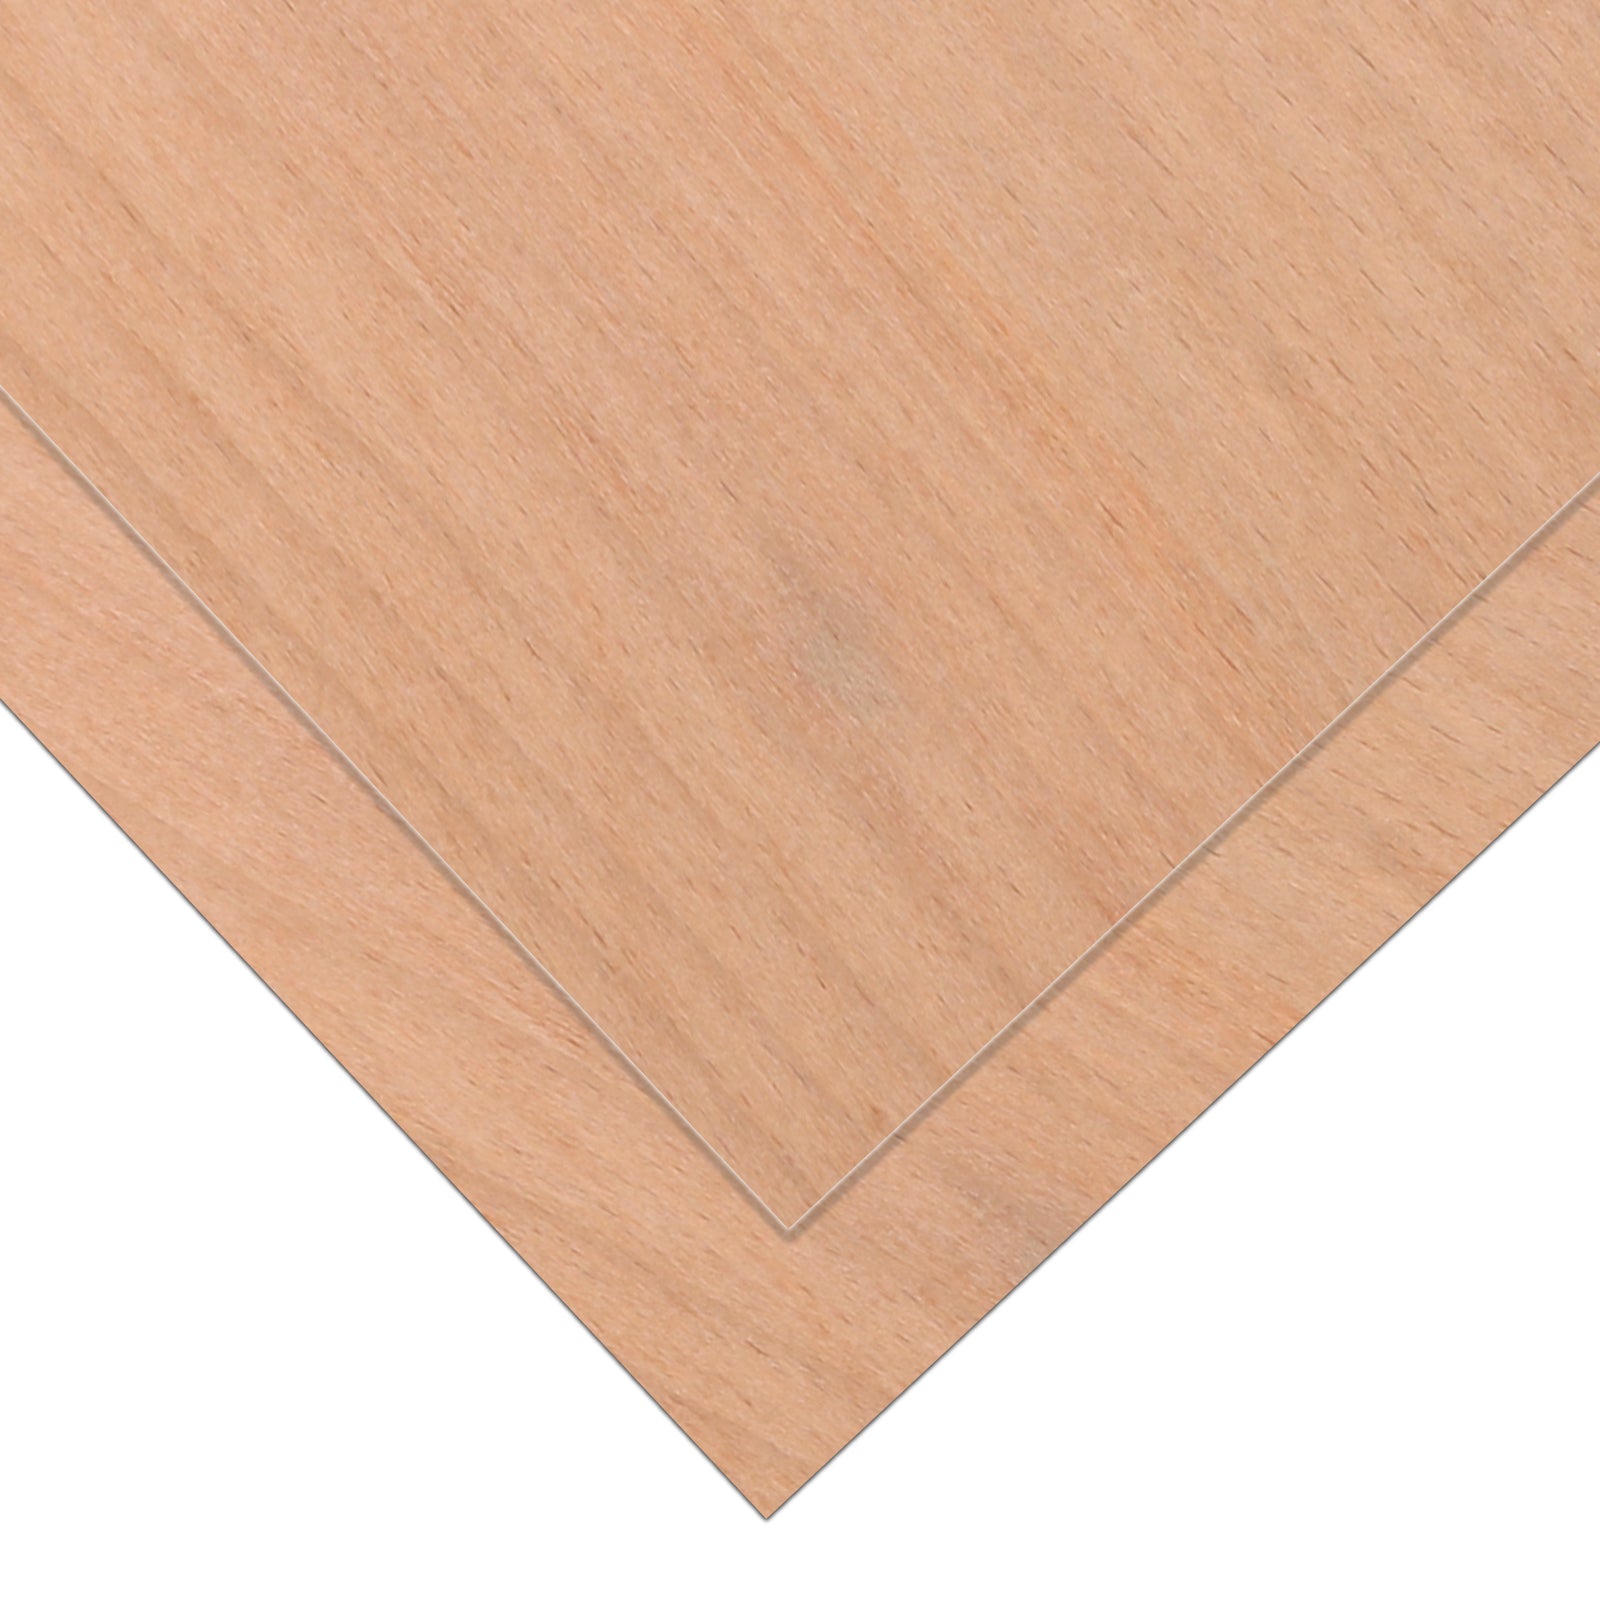 6pcs Red Beech Plywood 1/8" x 12" x 12" Bubinga Unfinished Wood for Crafts CNC Cutting Painting - CREATORALLY